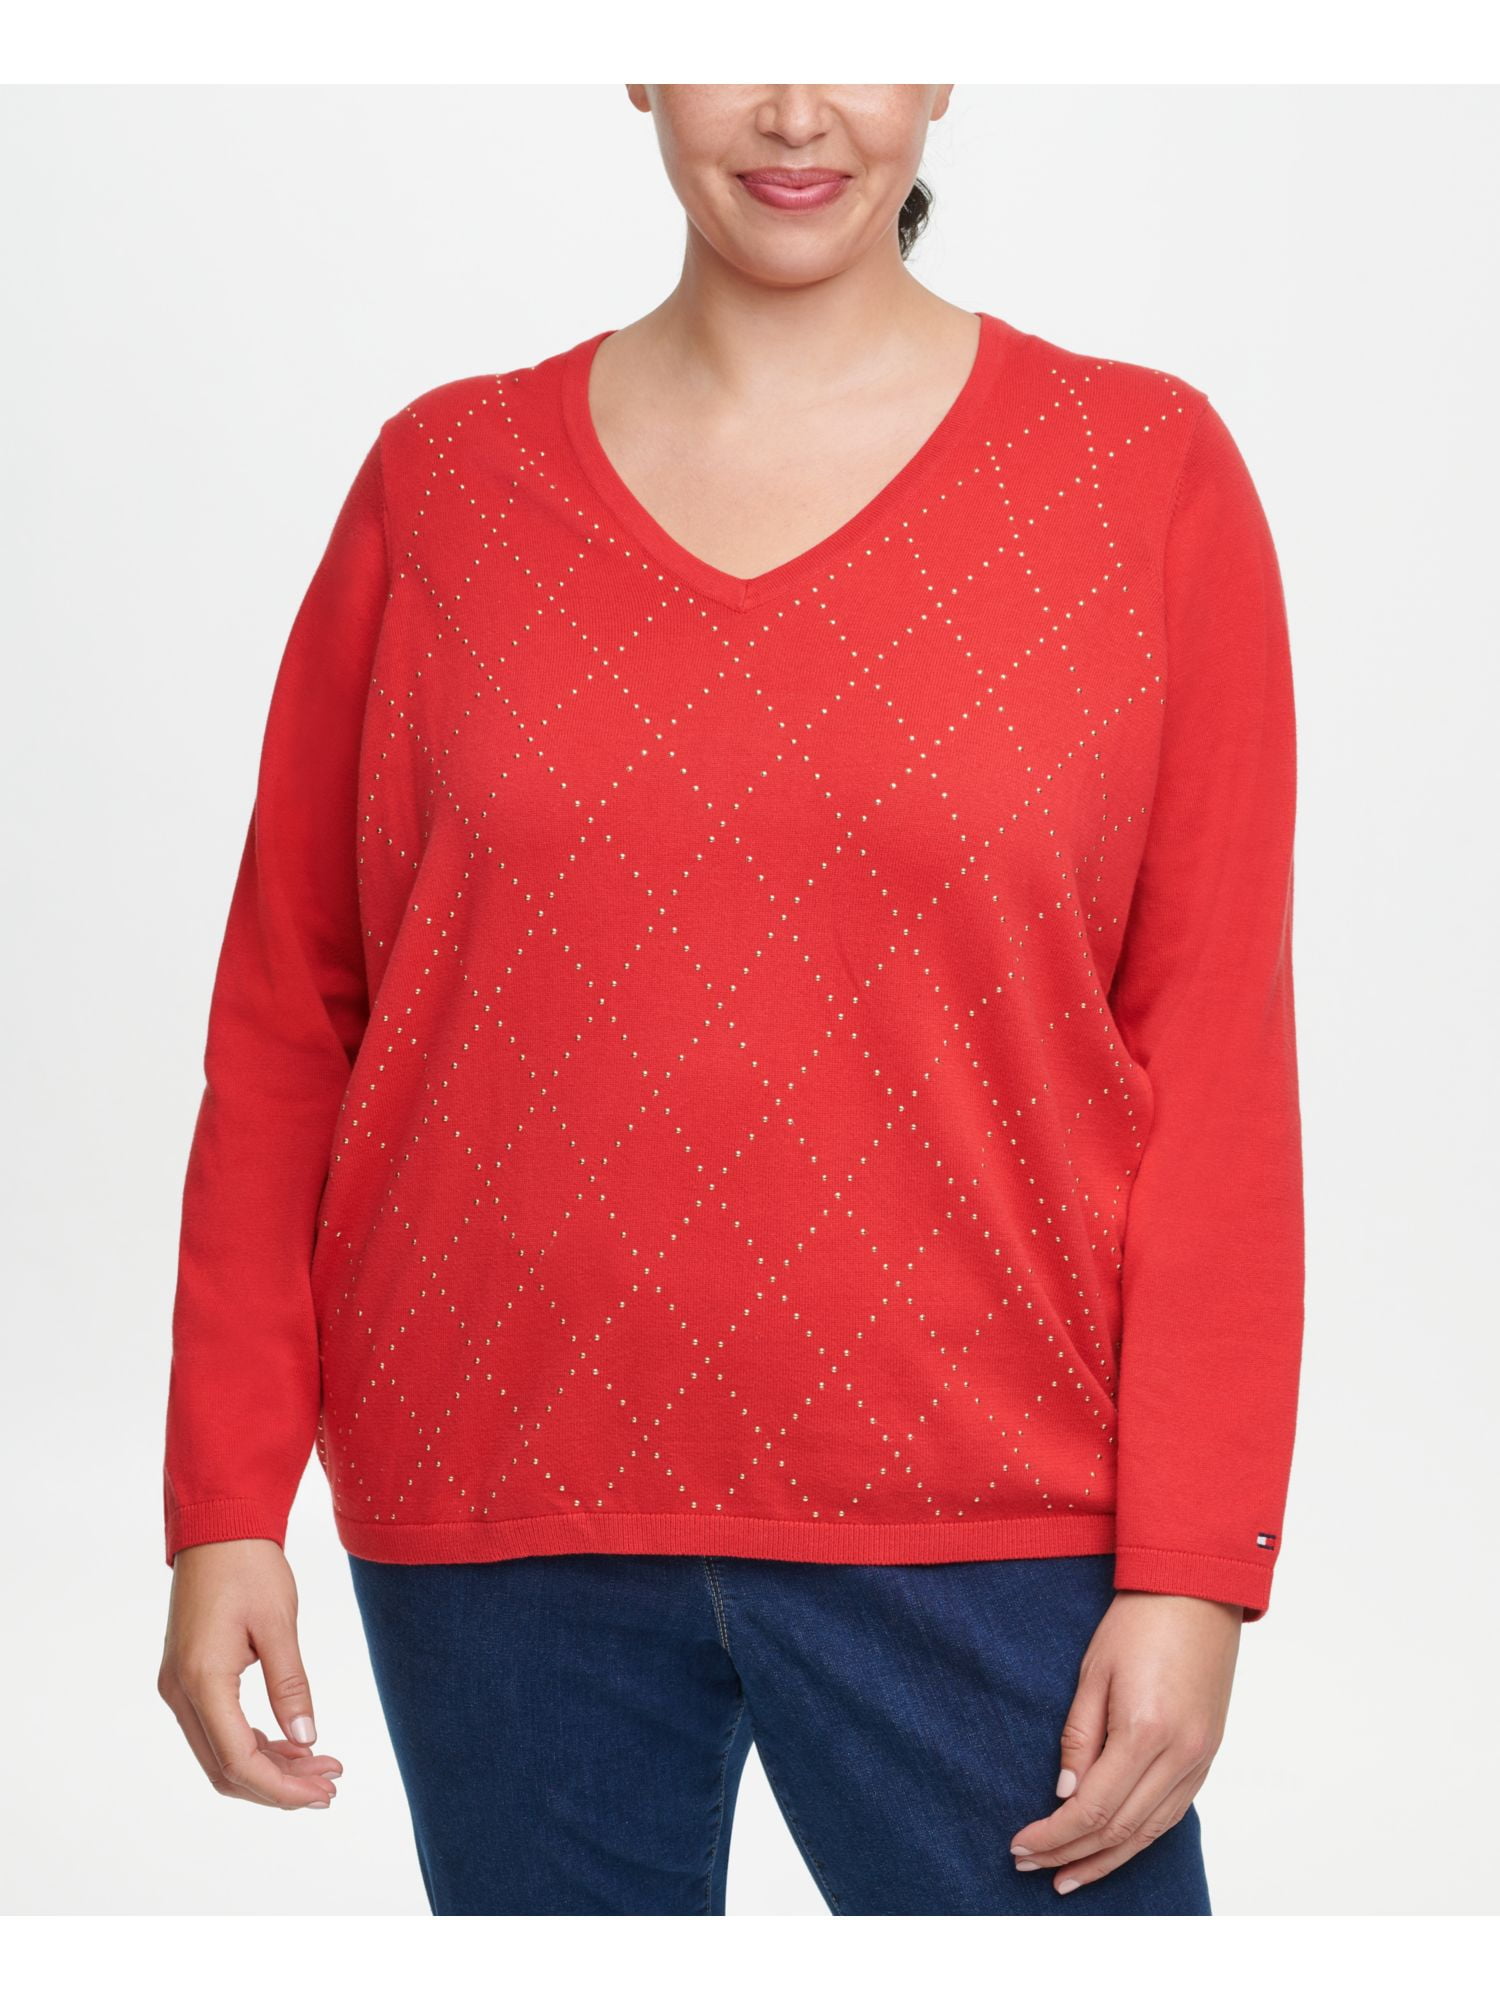 TOMMY HILFIGER Womens Red Cotton Sleeve Sweater Plus 1X -